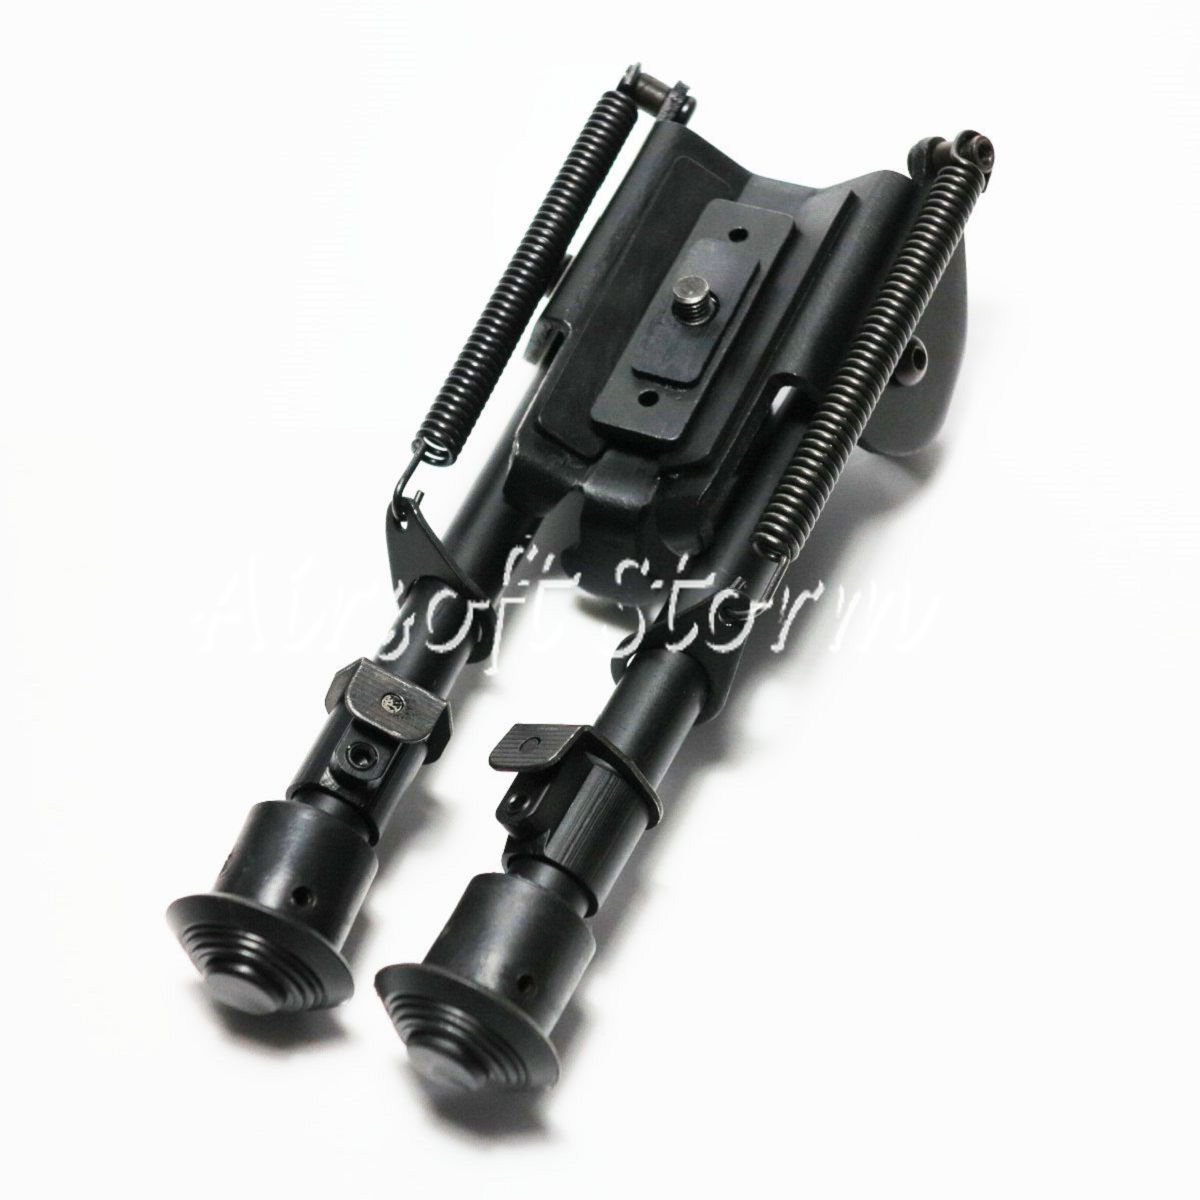 Shooting Gear Universal Rifle Spring Eject Rest 6"-9" Metal Bipod